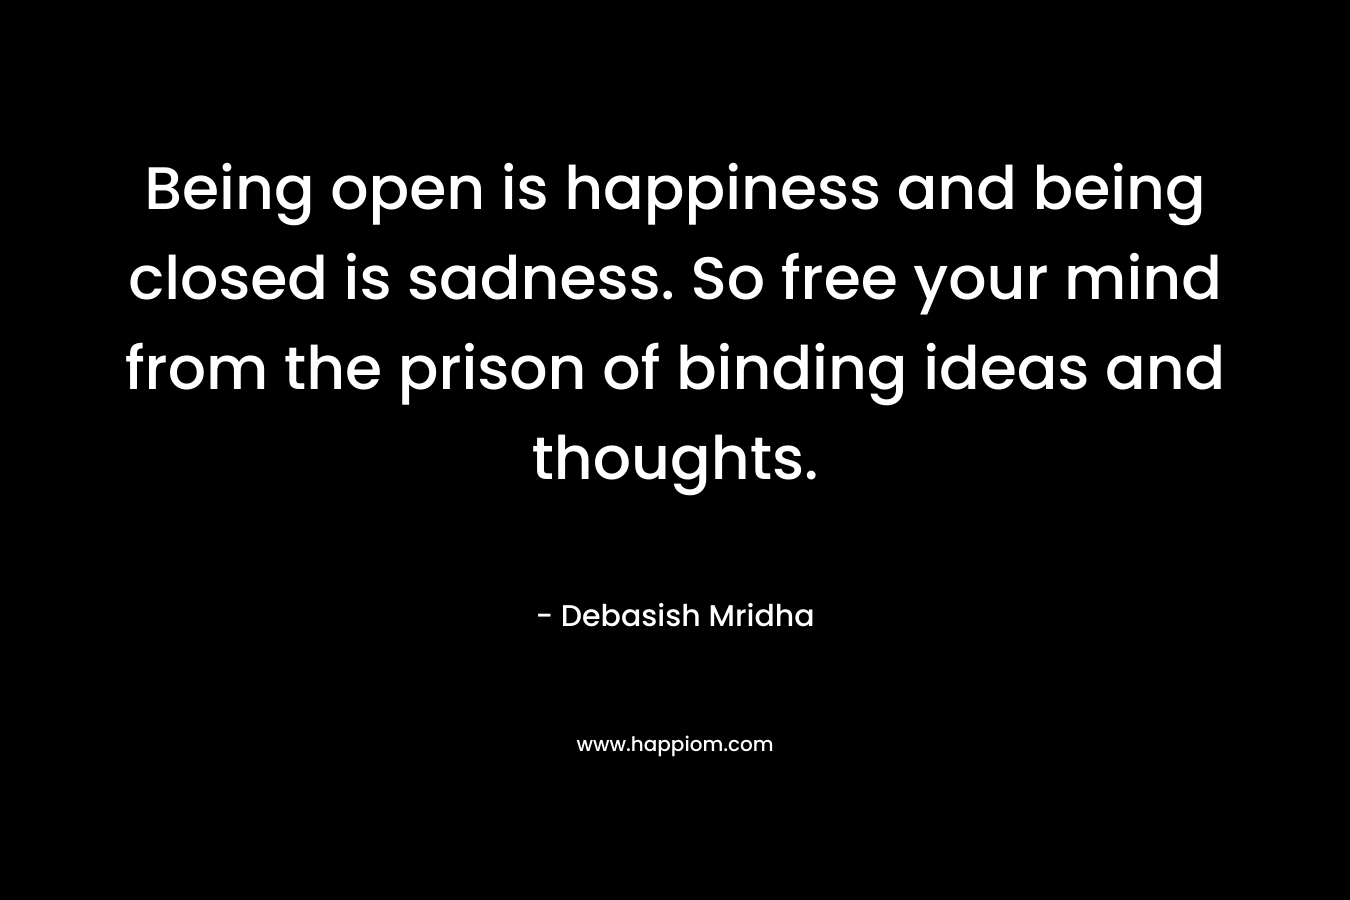 Being open is happiness and being closed is sadness. So free your mind from the prison of binding ideas and thoughts.